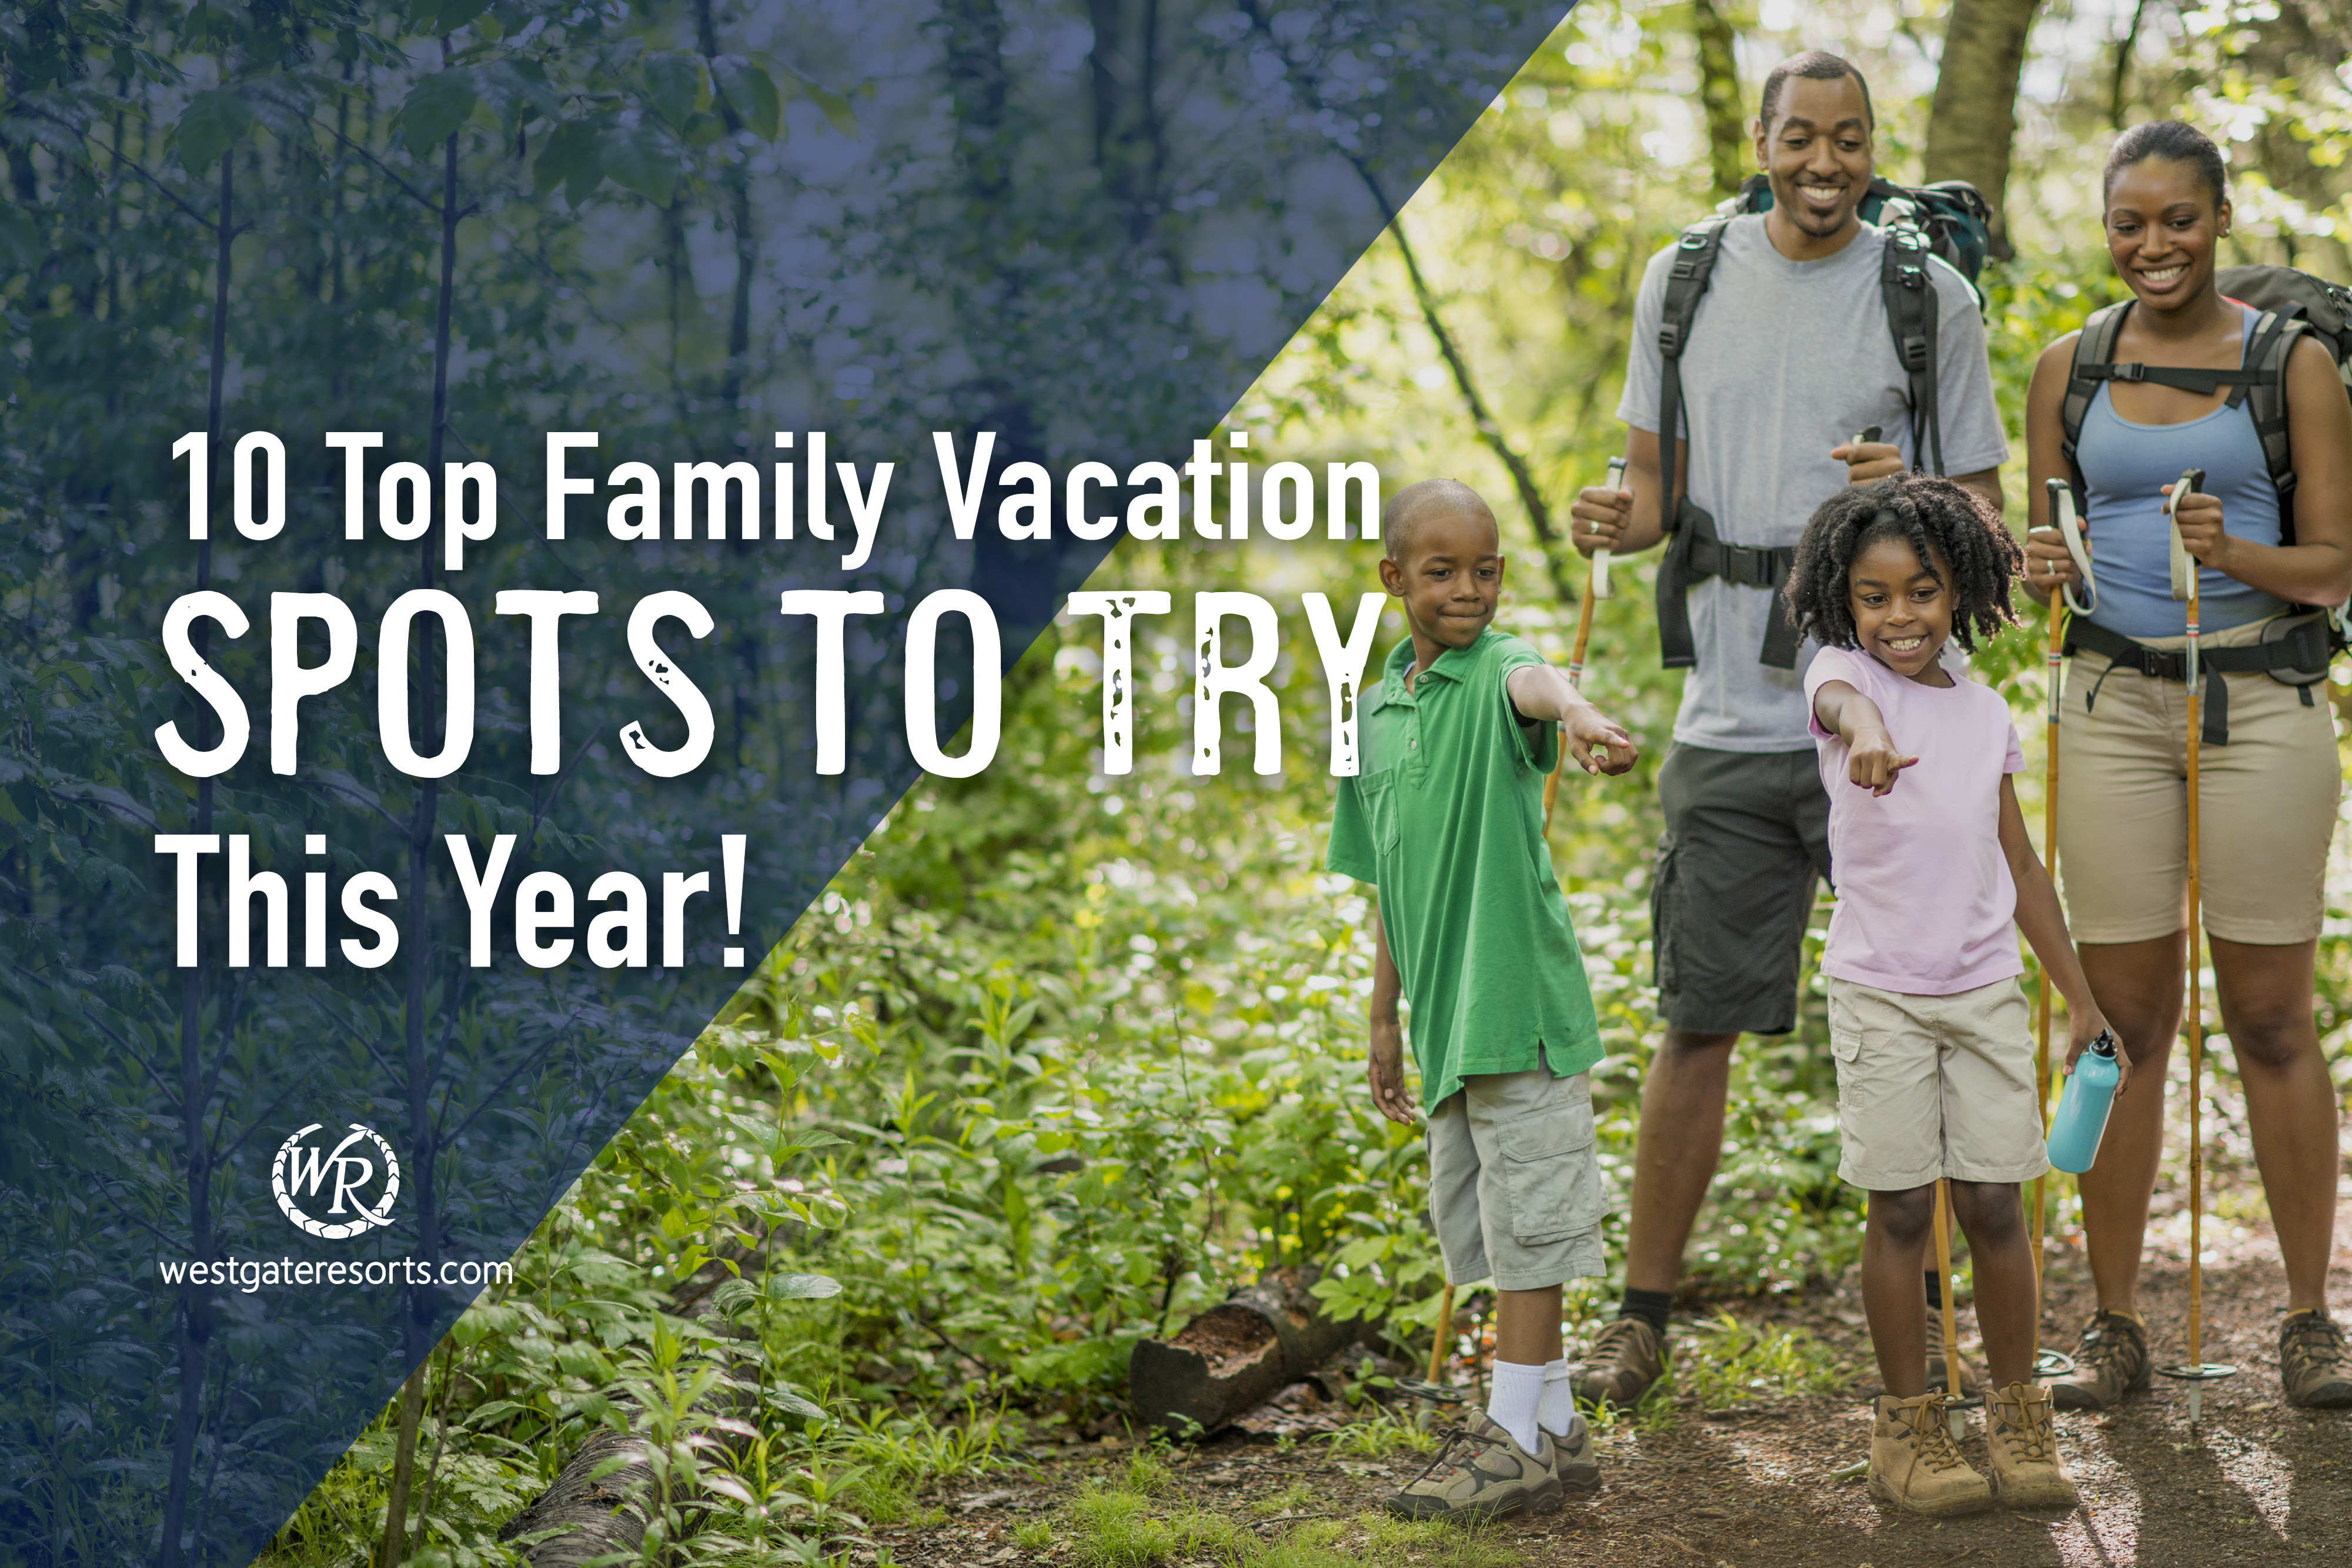 10 Top Family Vacation Spots to Try This Year